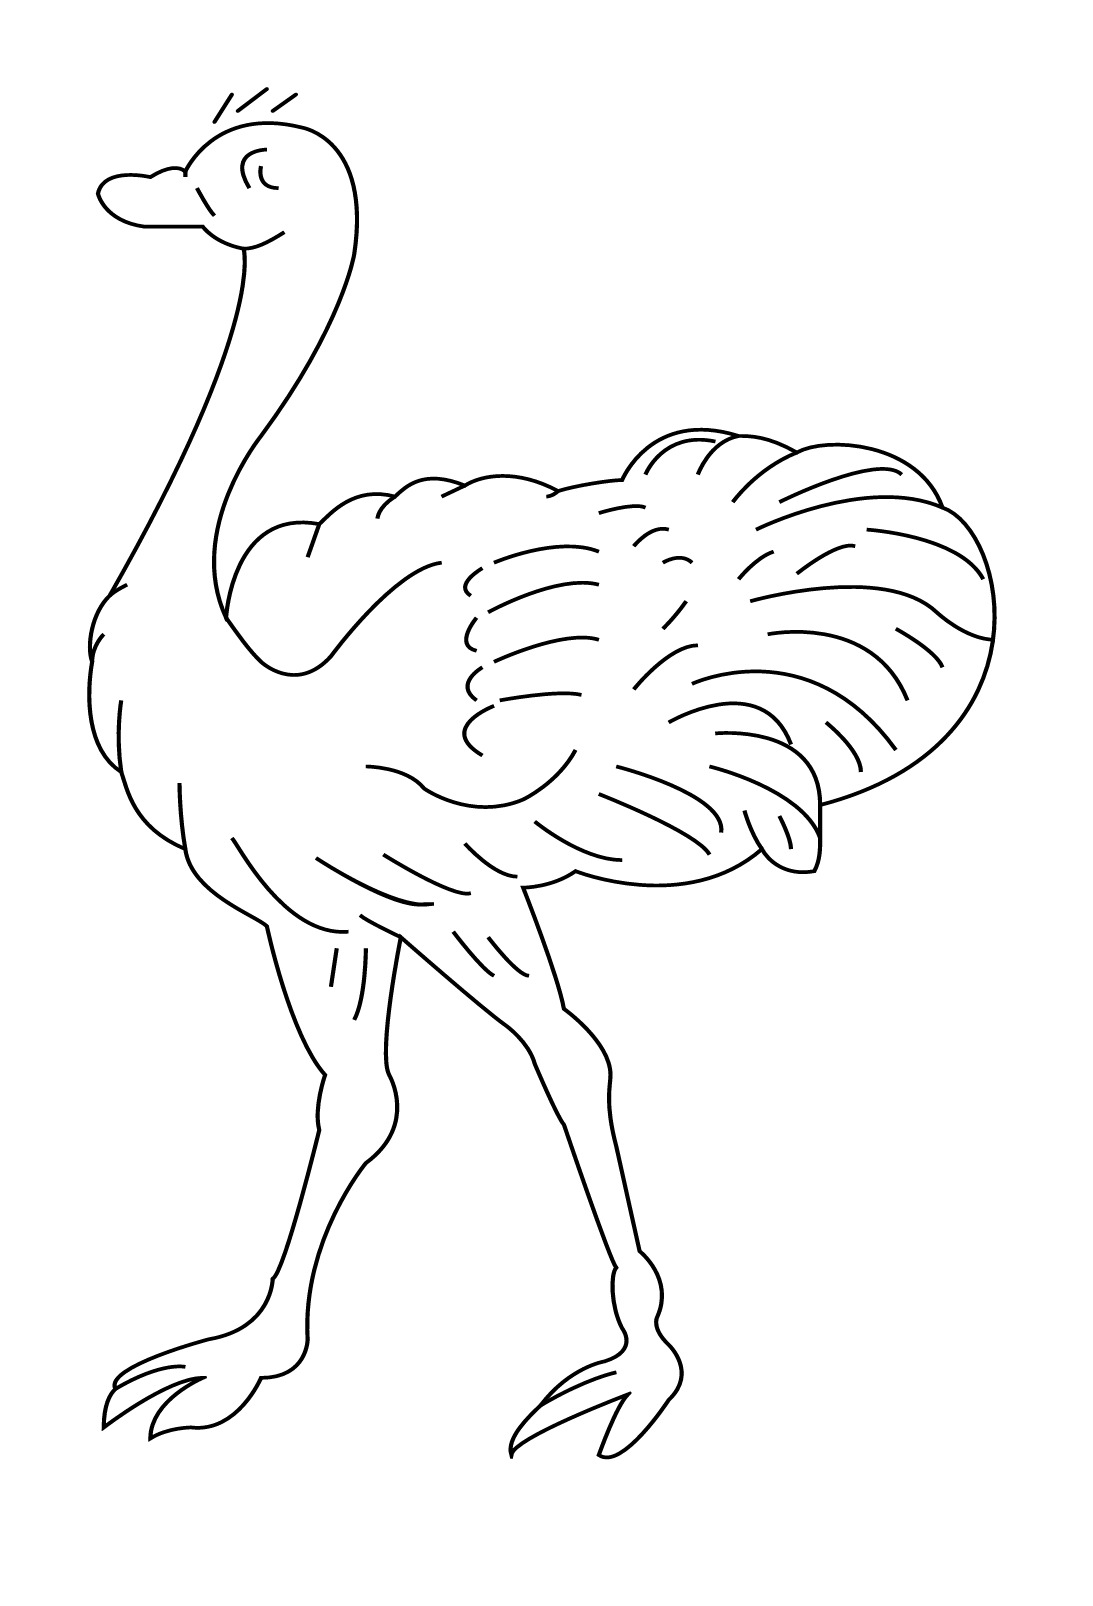 Download Ostrich (Animals) - Printable coloring pages